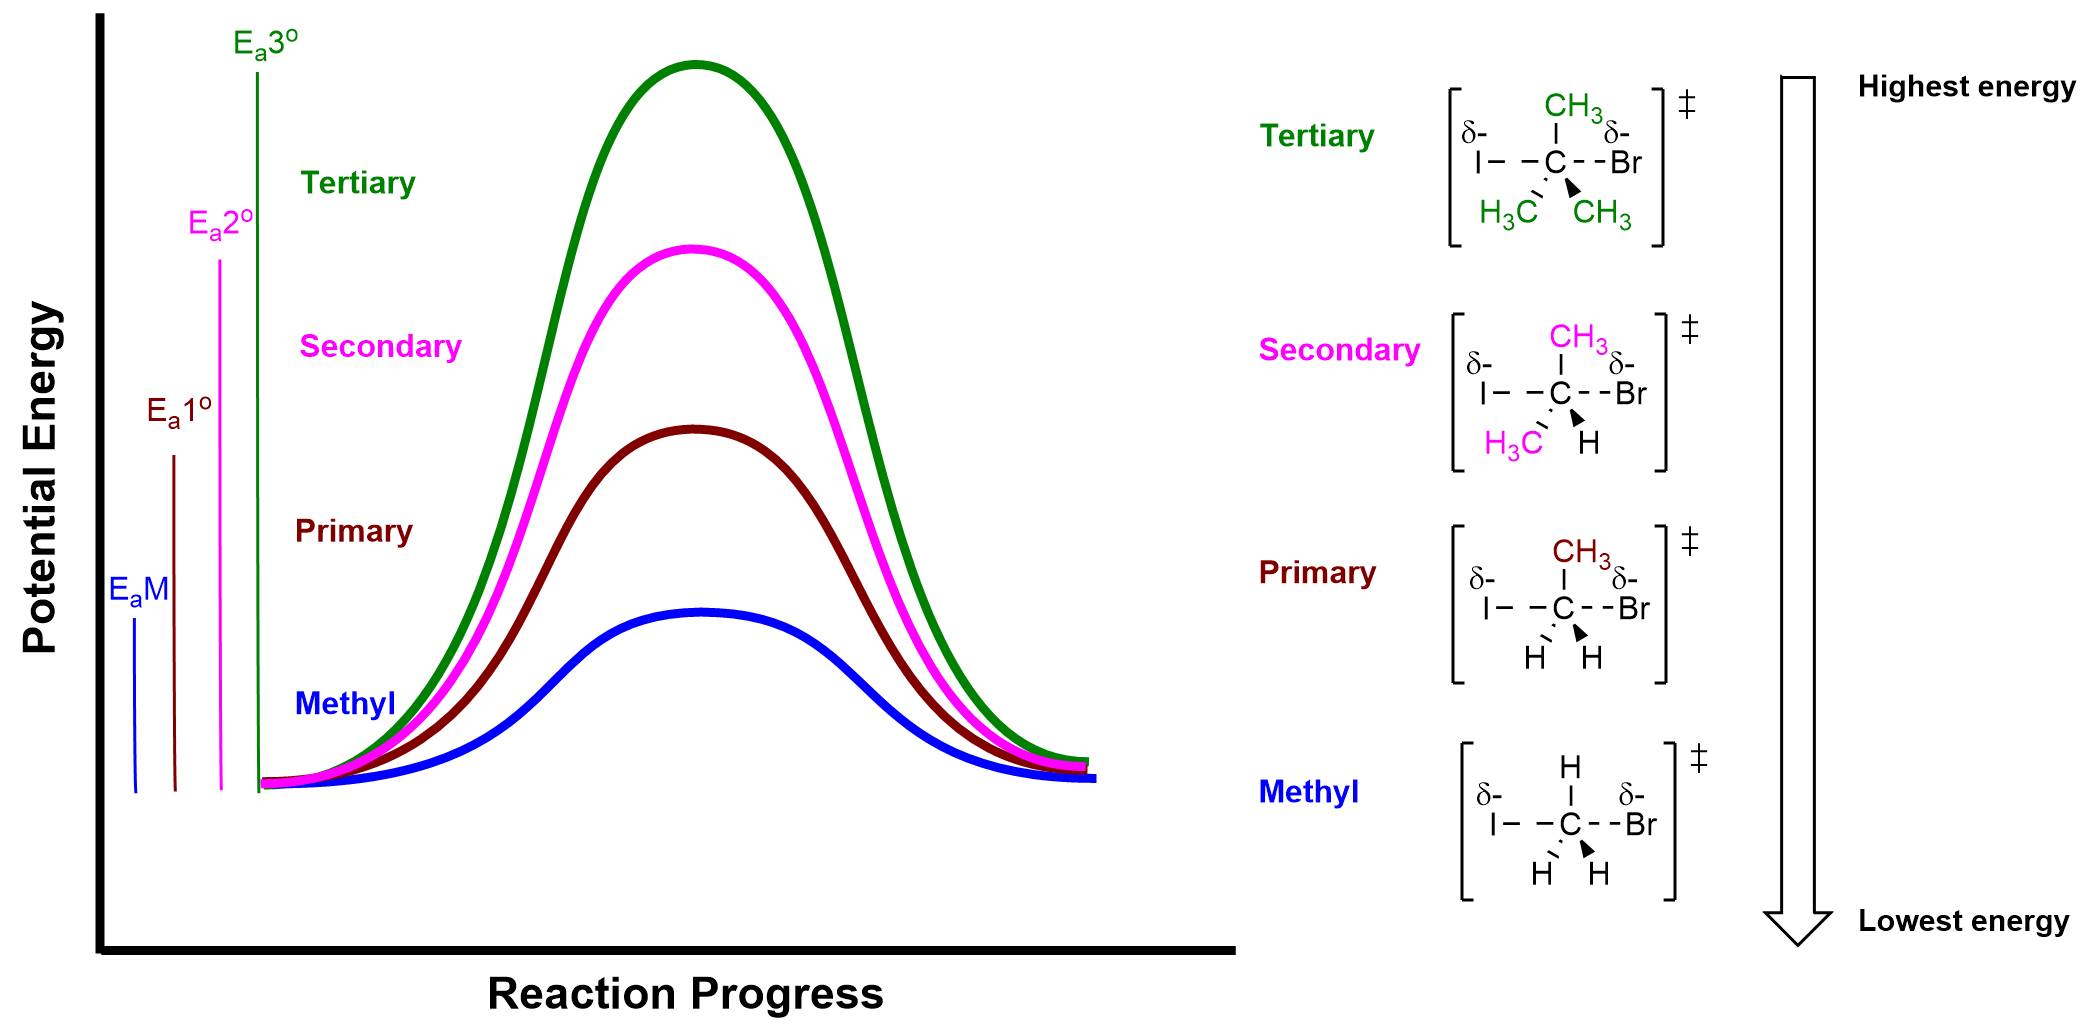 An energy profile diagram has been drawn with the x-axis being labelled Reaction Progress and the y-axis labelled Potential Energy. There are four energy profiles for alkyl halide present: Methyl coloured blue, Primary coloured brown, Secondary coloured pink and Tertiary coloured green. Each alkyl halide is represented by a bell-shaped curve with varying activation energies. Tertiary alkyl halides have the highest activation energy, followed by secondary, primary, and methyl alkyl halides. The alkyl halide structures are illustrated with the iodine, carbon, and bromine atoms arranged left to right, with a partial negative charge on the iodine and a partial negative charge on the bromide. Methyl has one carbon bonded to three hydrogens, primary has one methyl group attached, secondary has two methyl groups, and tertiary has three methyl groups. An arrow on the far right indicates energy levels from high to low.